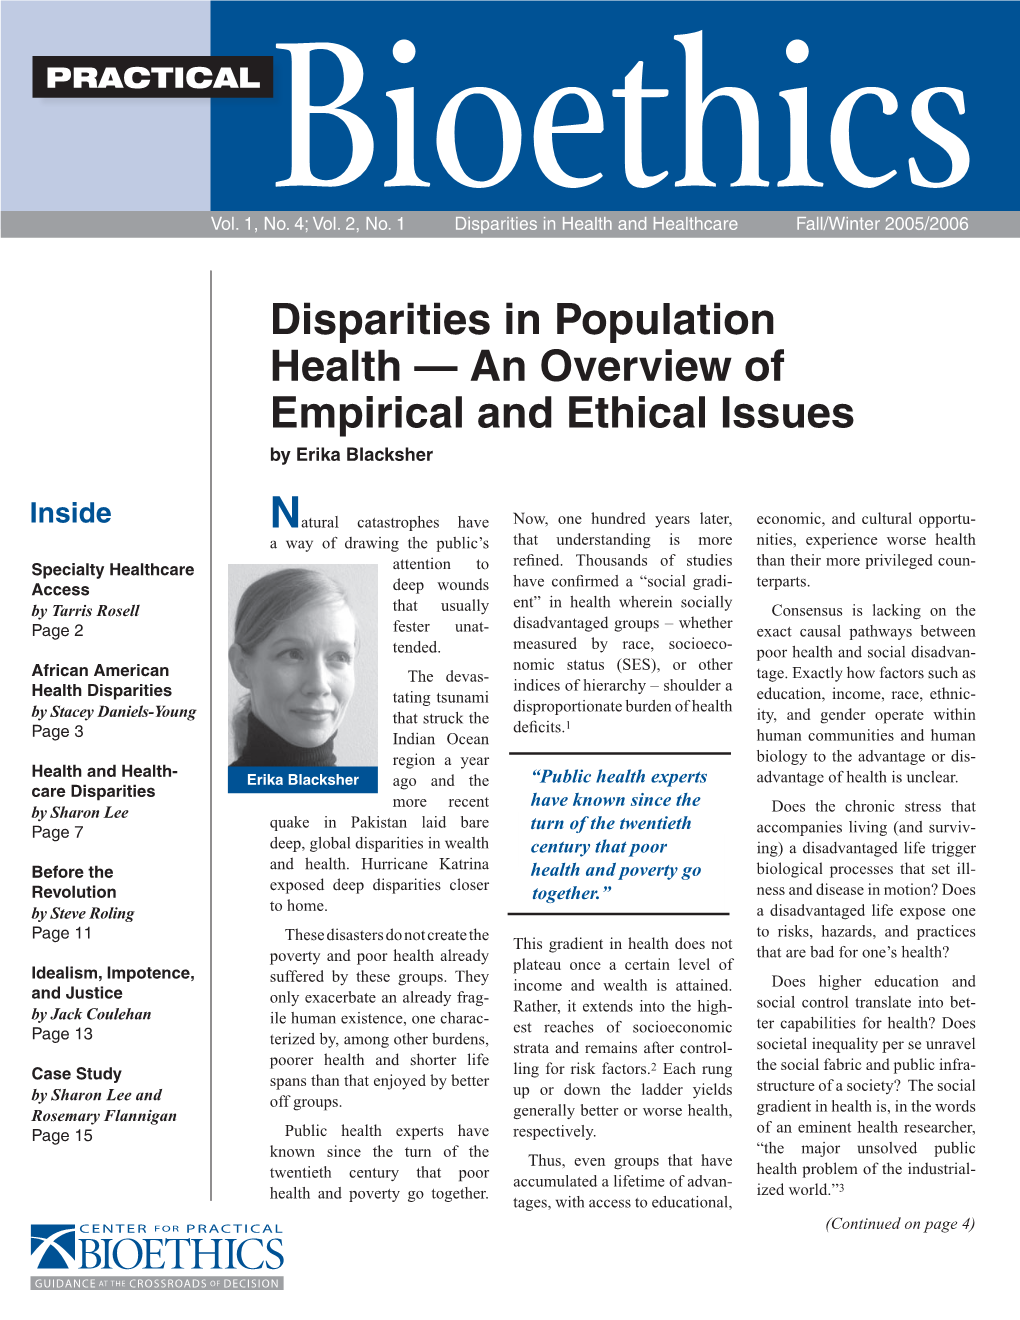 Disparities in Population Health — an Overview of Empirical and Ethical Issues by Erika Blacksher